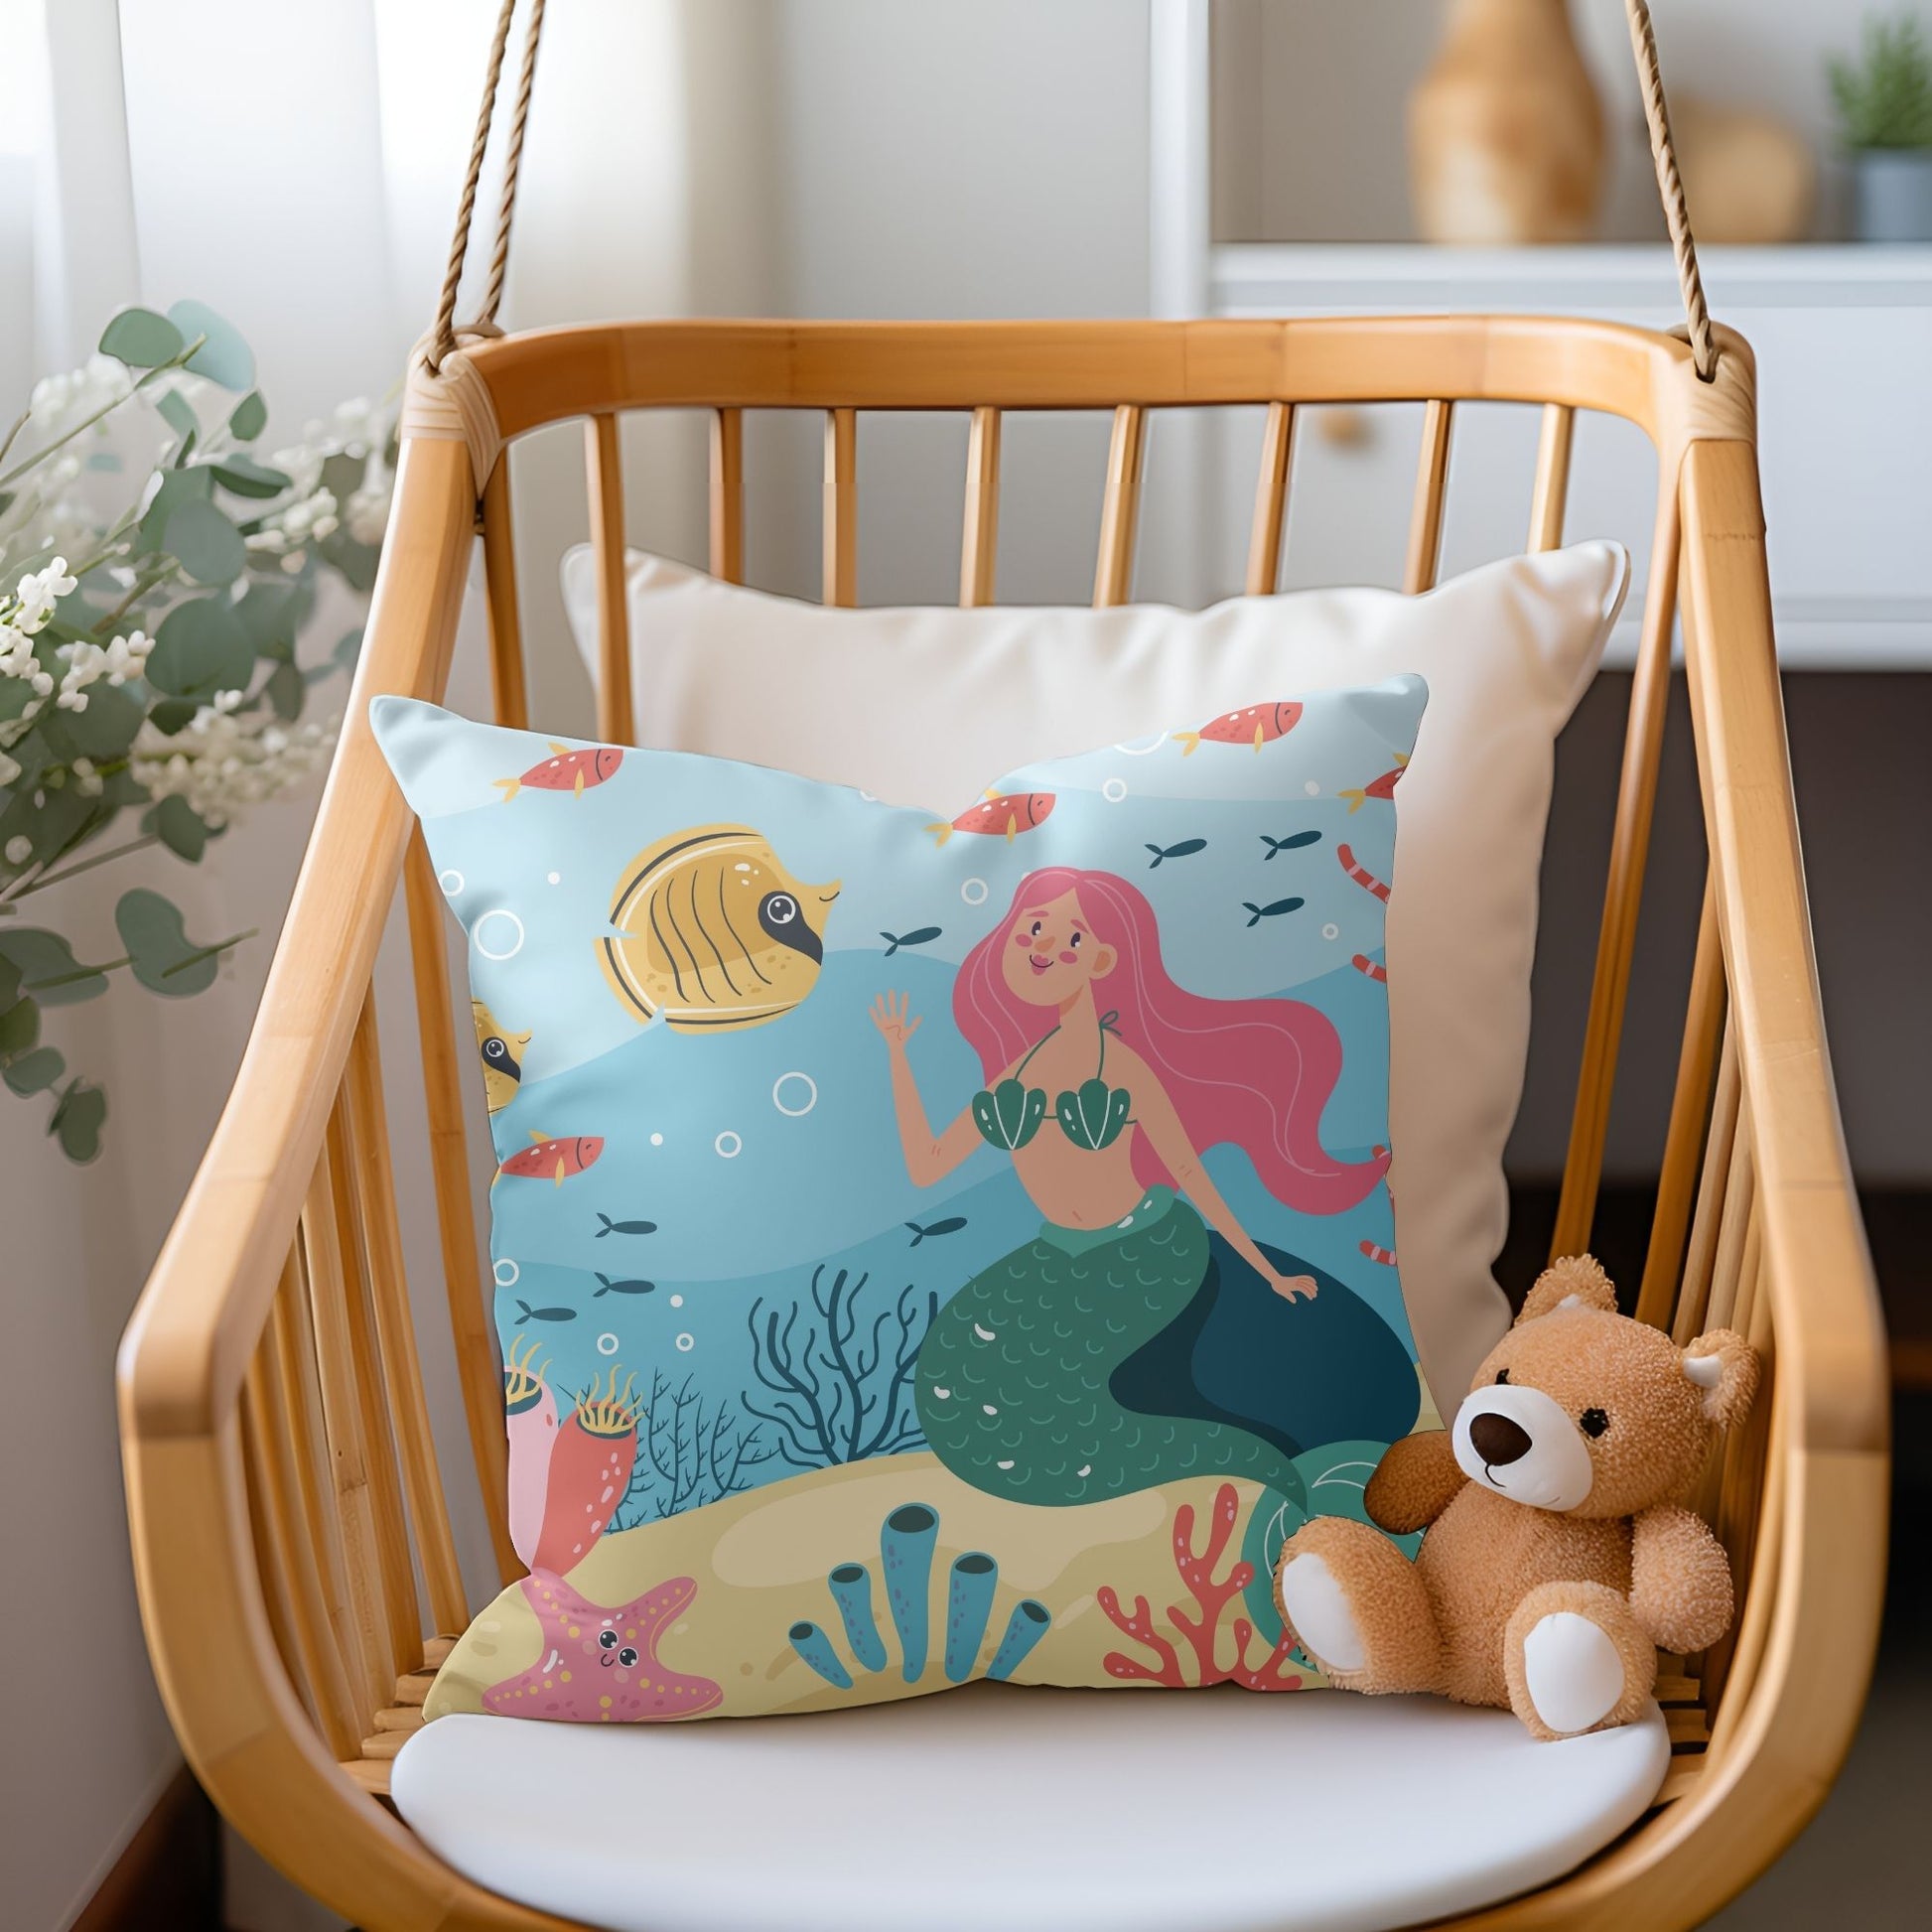 Sweet mermaid-patterned pillow to add magic to girls' bedrooms.